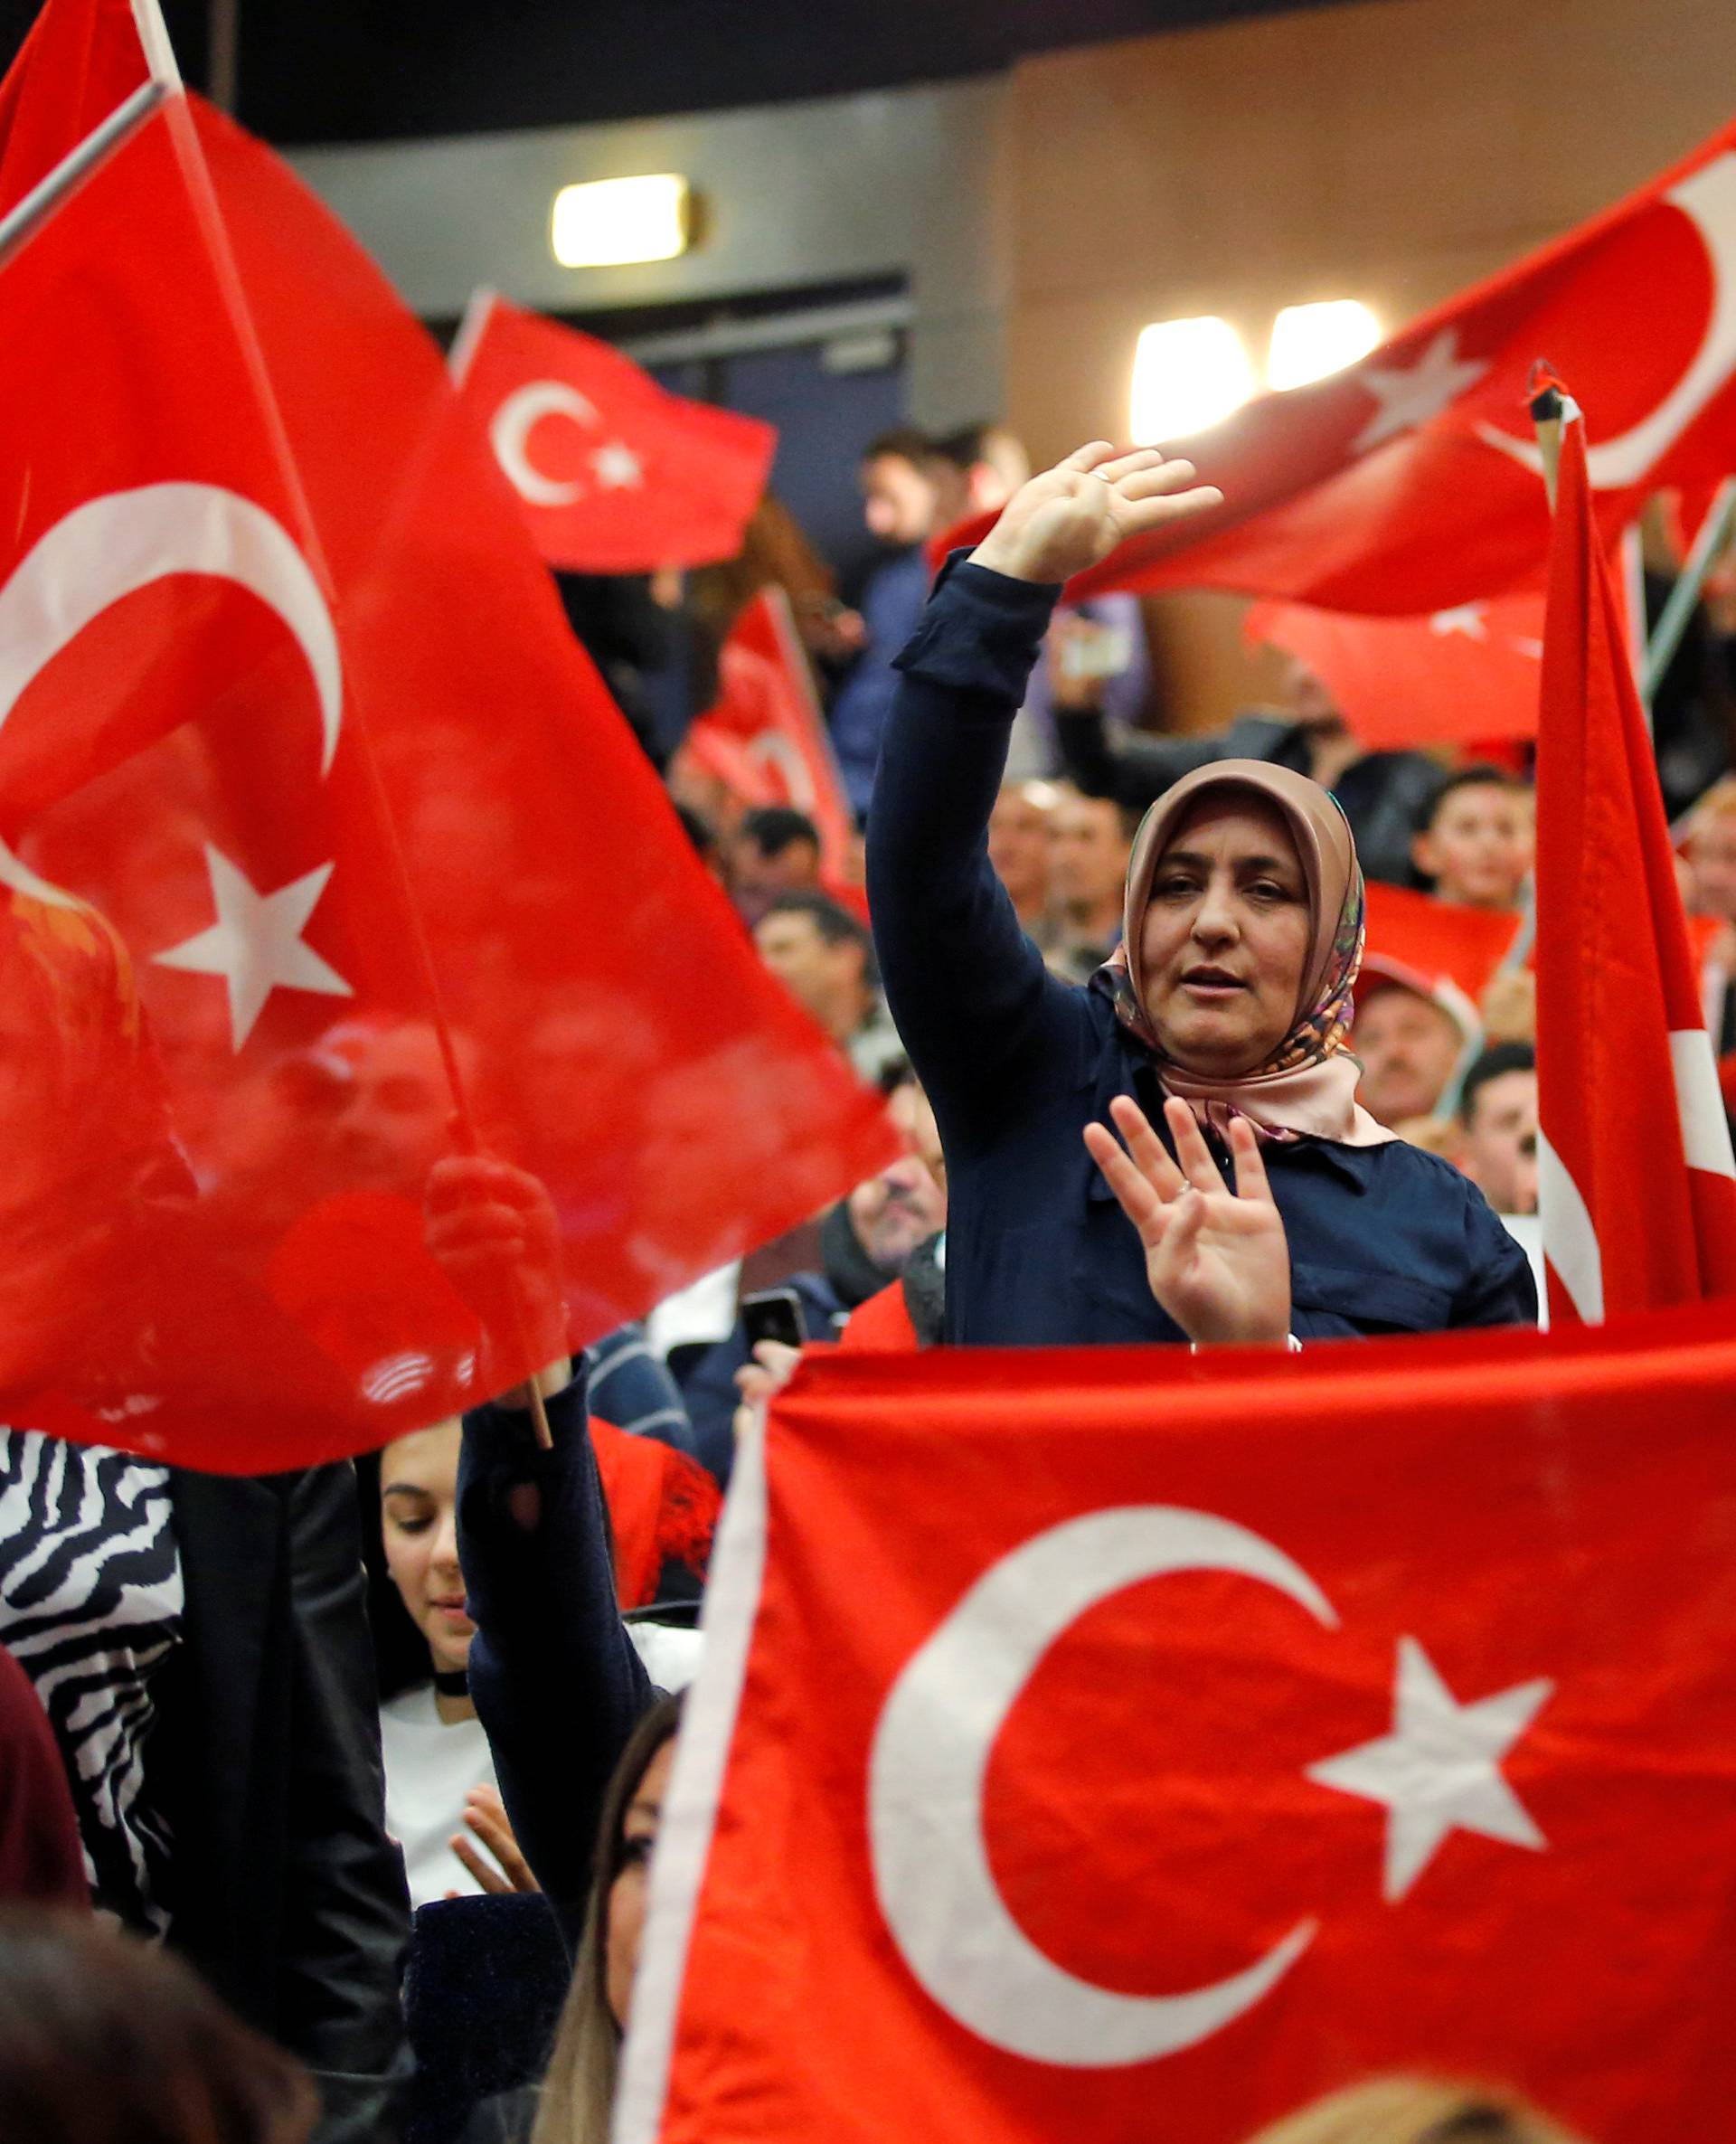 Supporters wave Turkish flags ahead of the start of a political rally on Turkey's upcoming referendum, in Metz